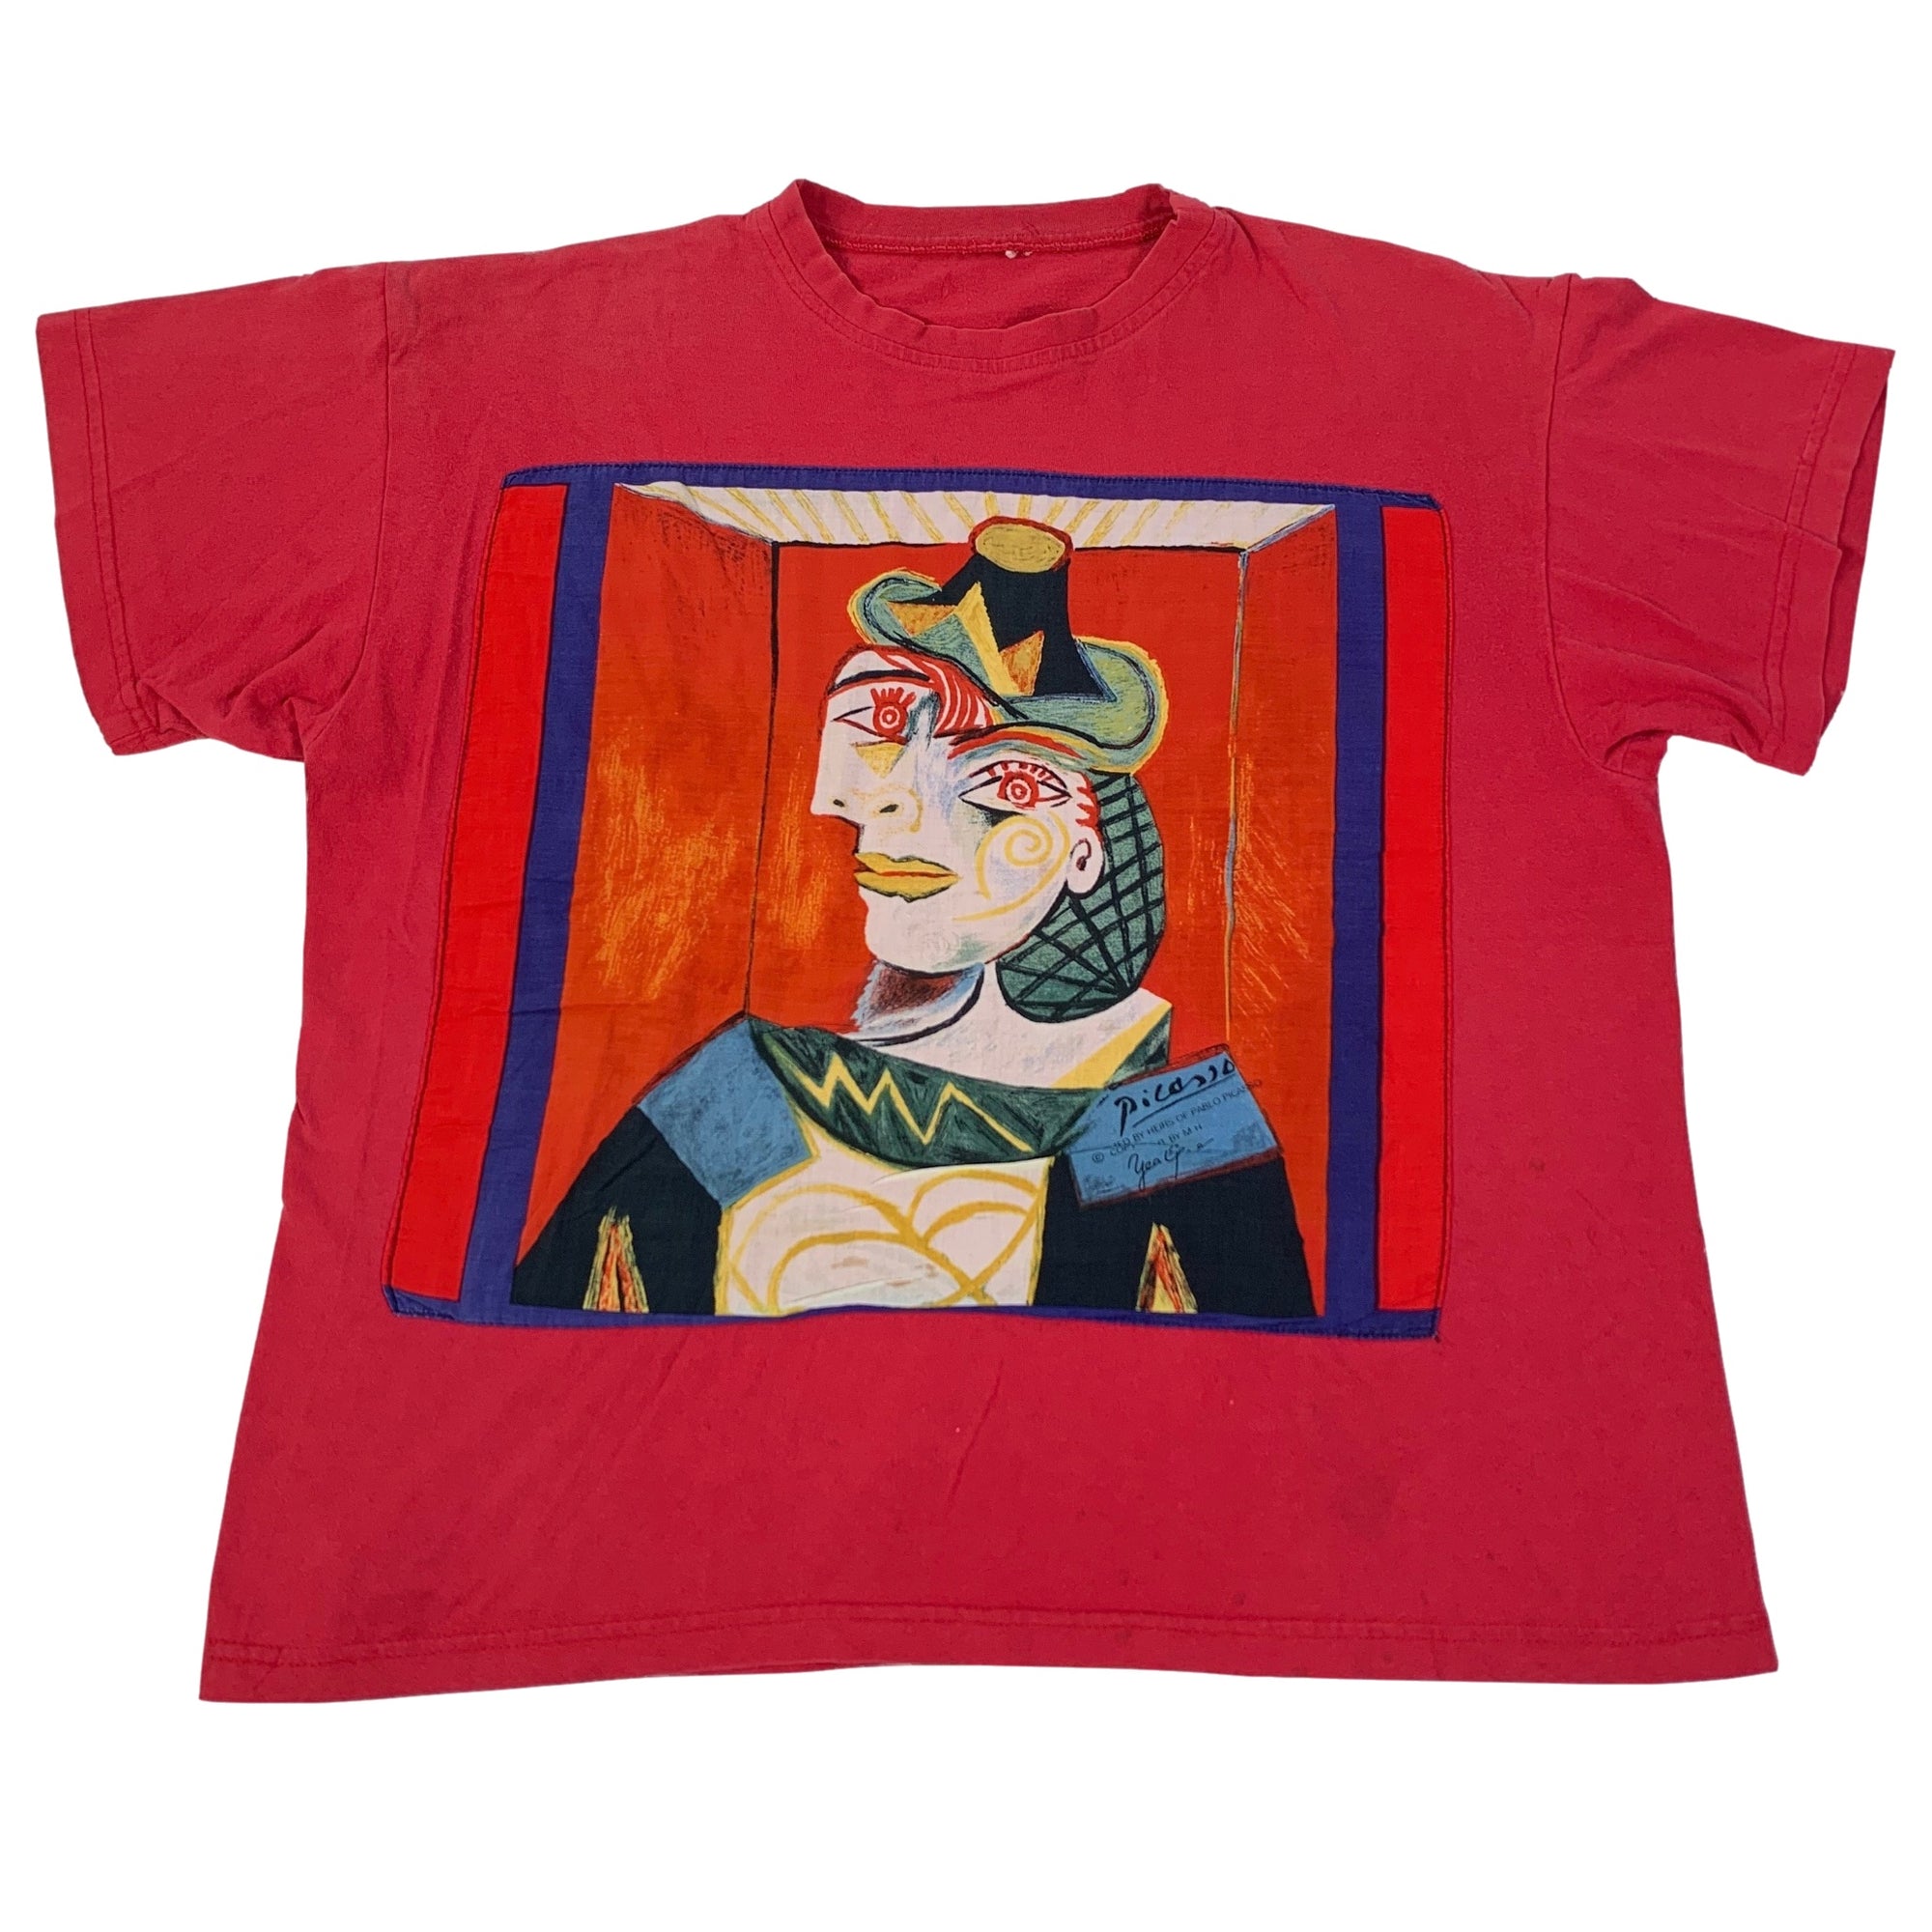 Vintage Picasso "Seated Woman" T-Shirt - jointcustodydc